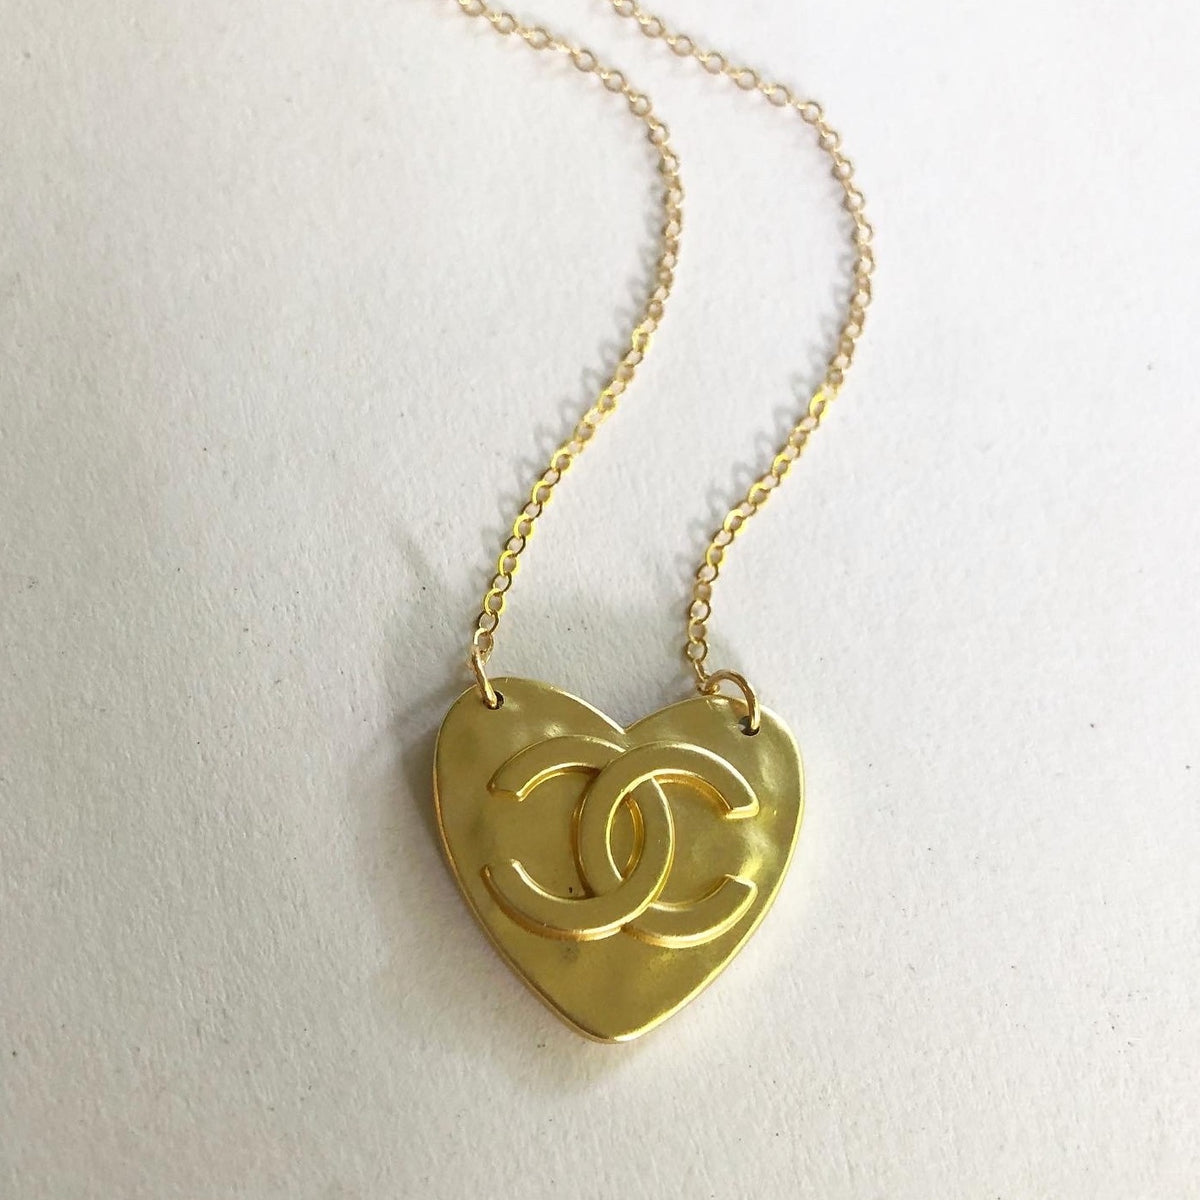 Large Gold Chanel Heart Necklace